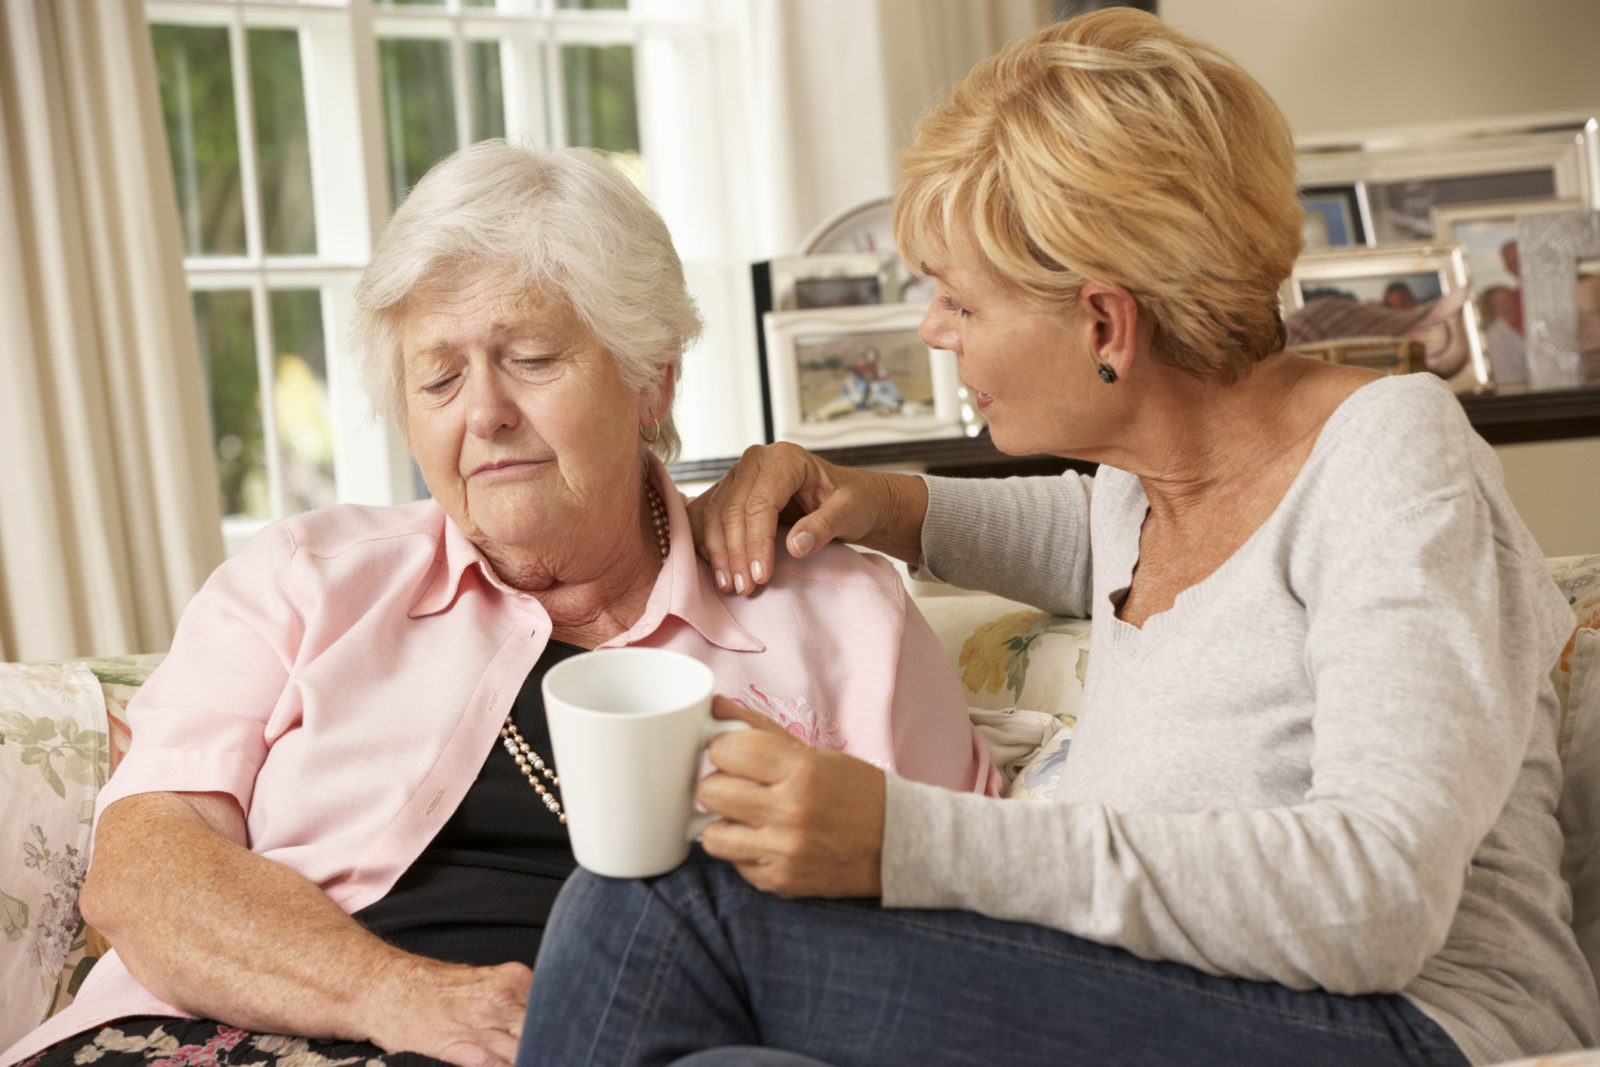 Adult Daughter Visiting Unhappy Senior Mother Sitting On Sofa At Home Trying To Comfort Her